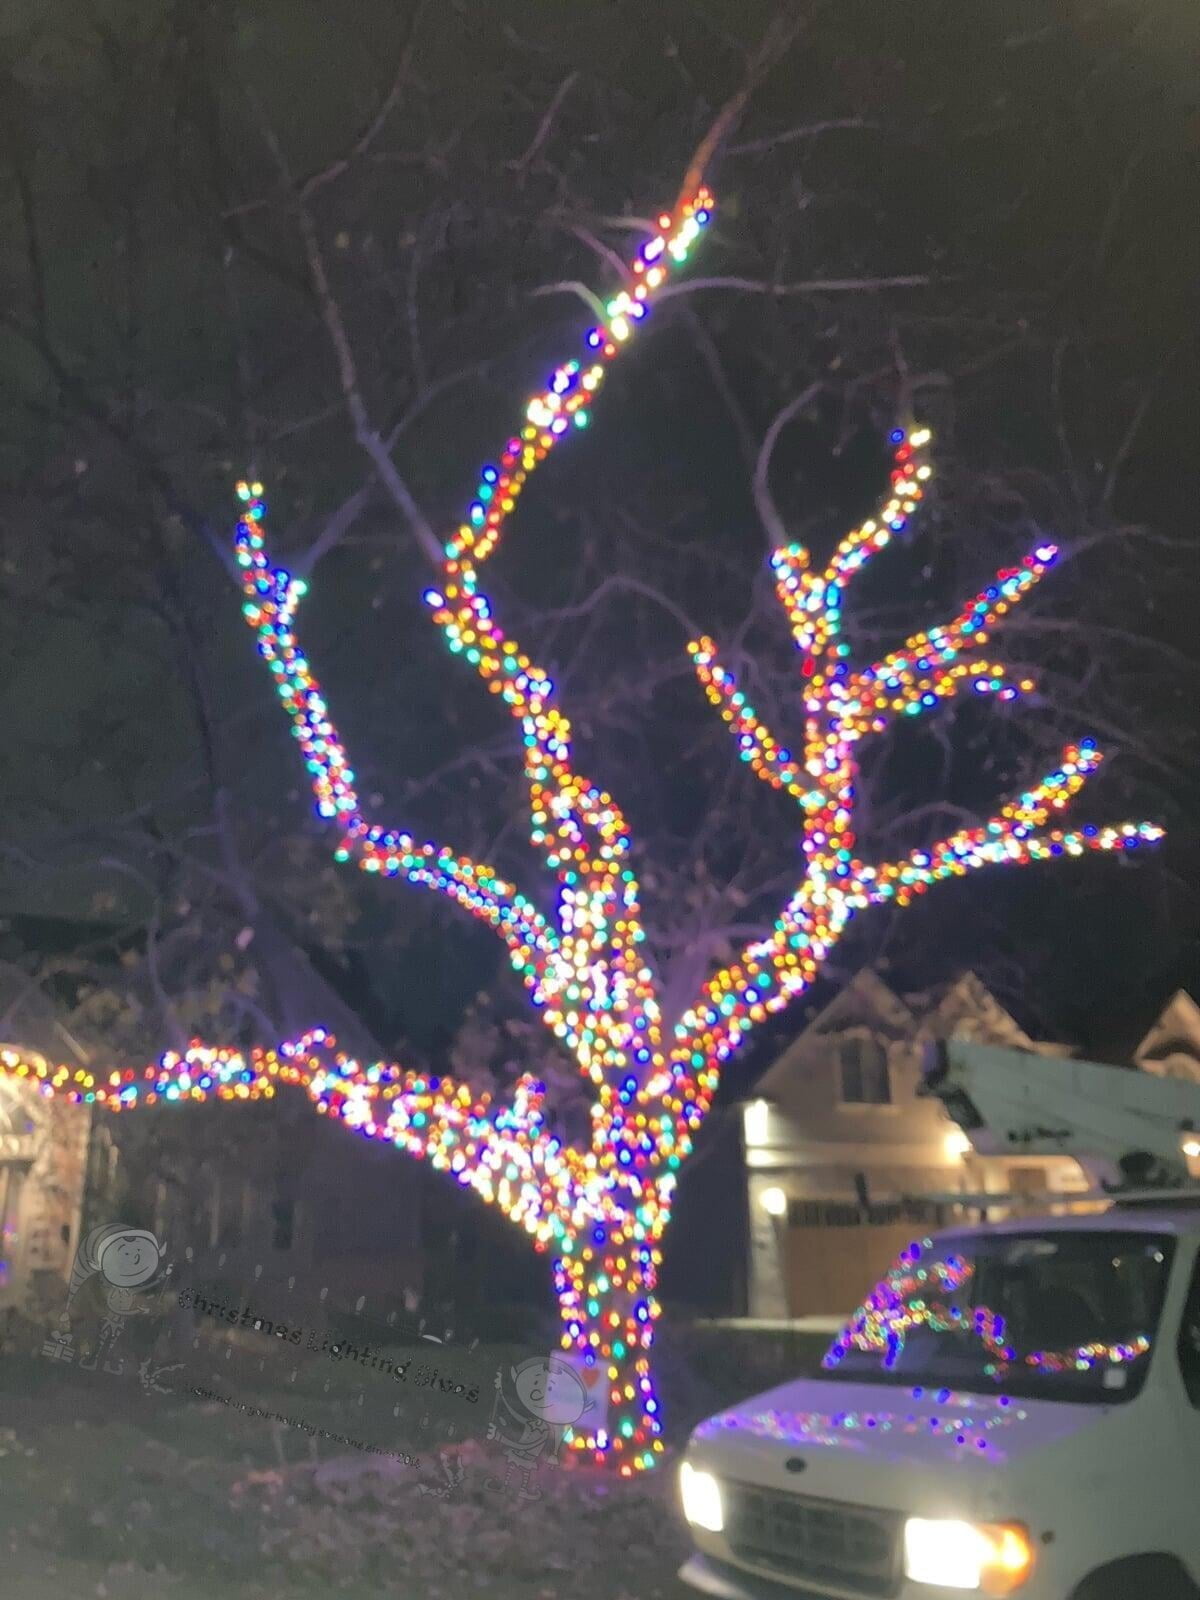 Tree decorated with multicolor festive lights